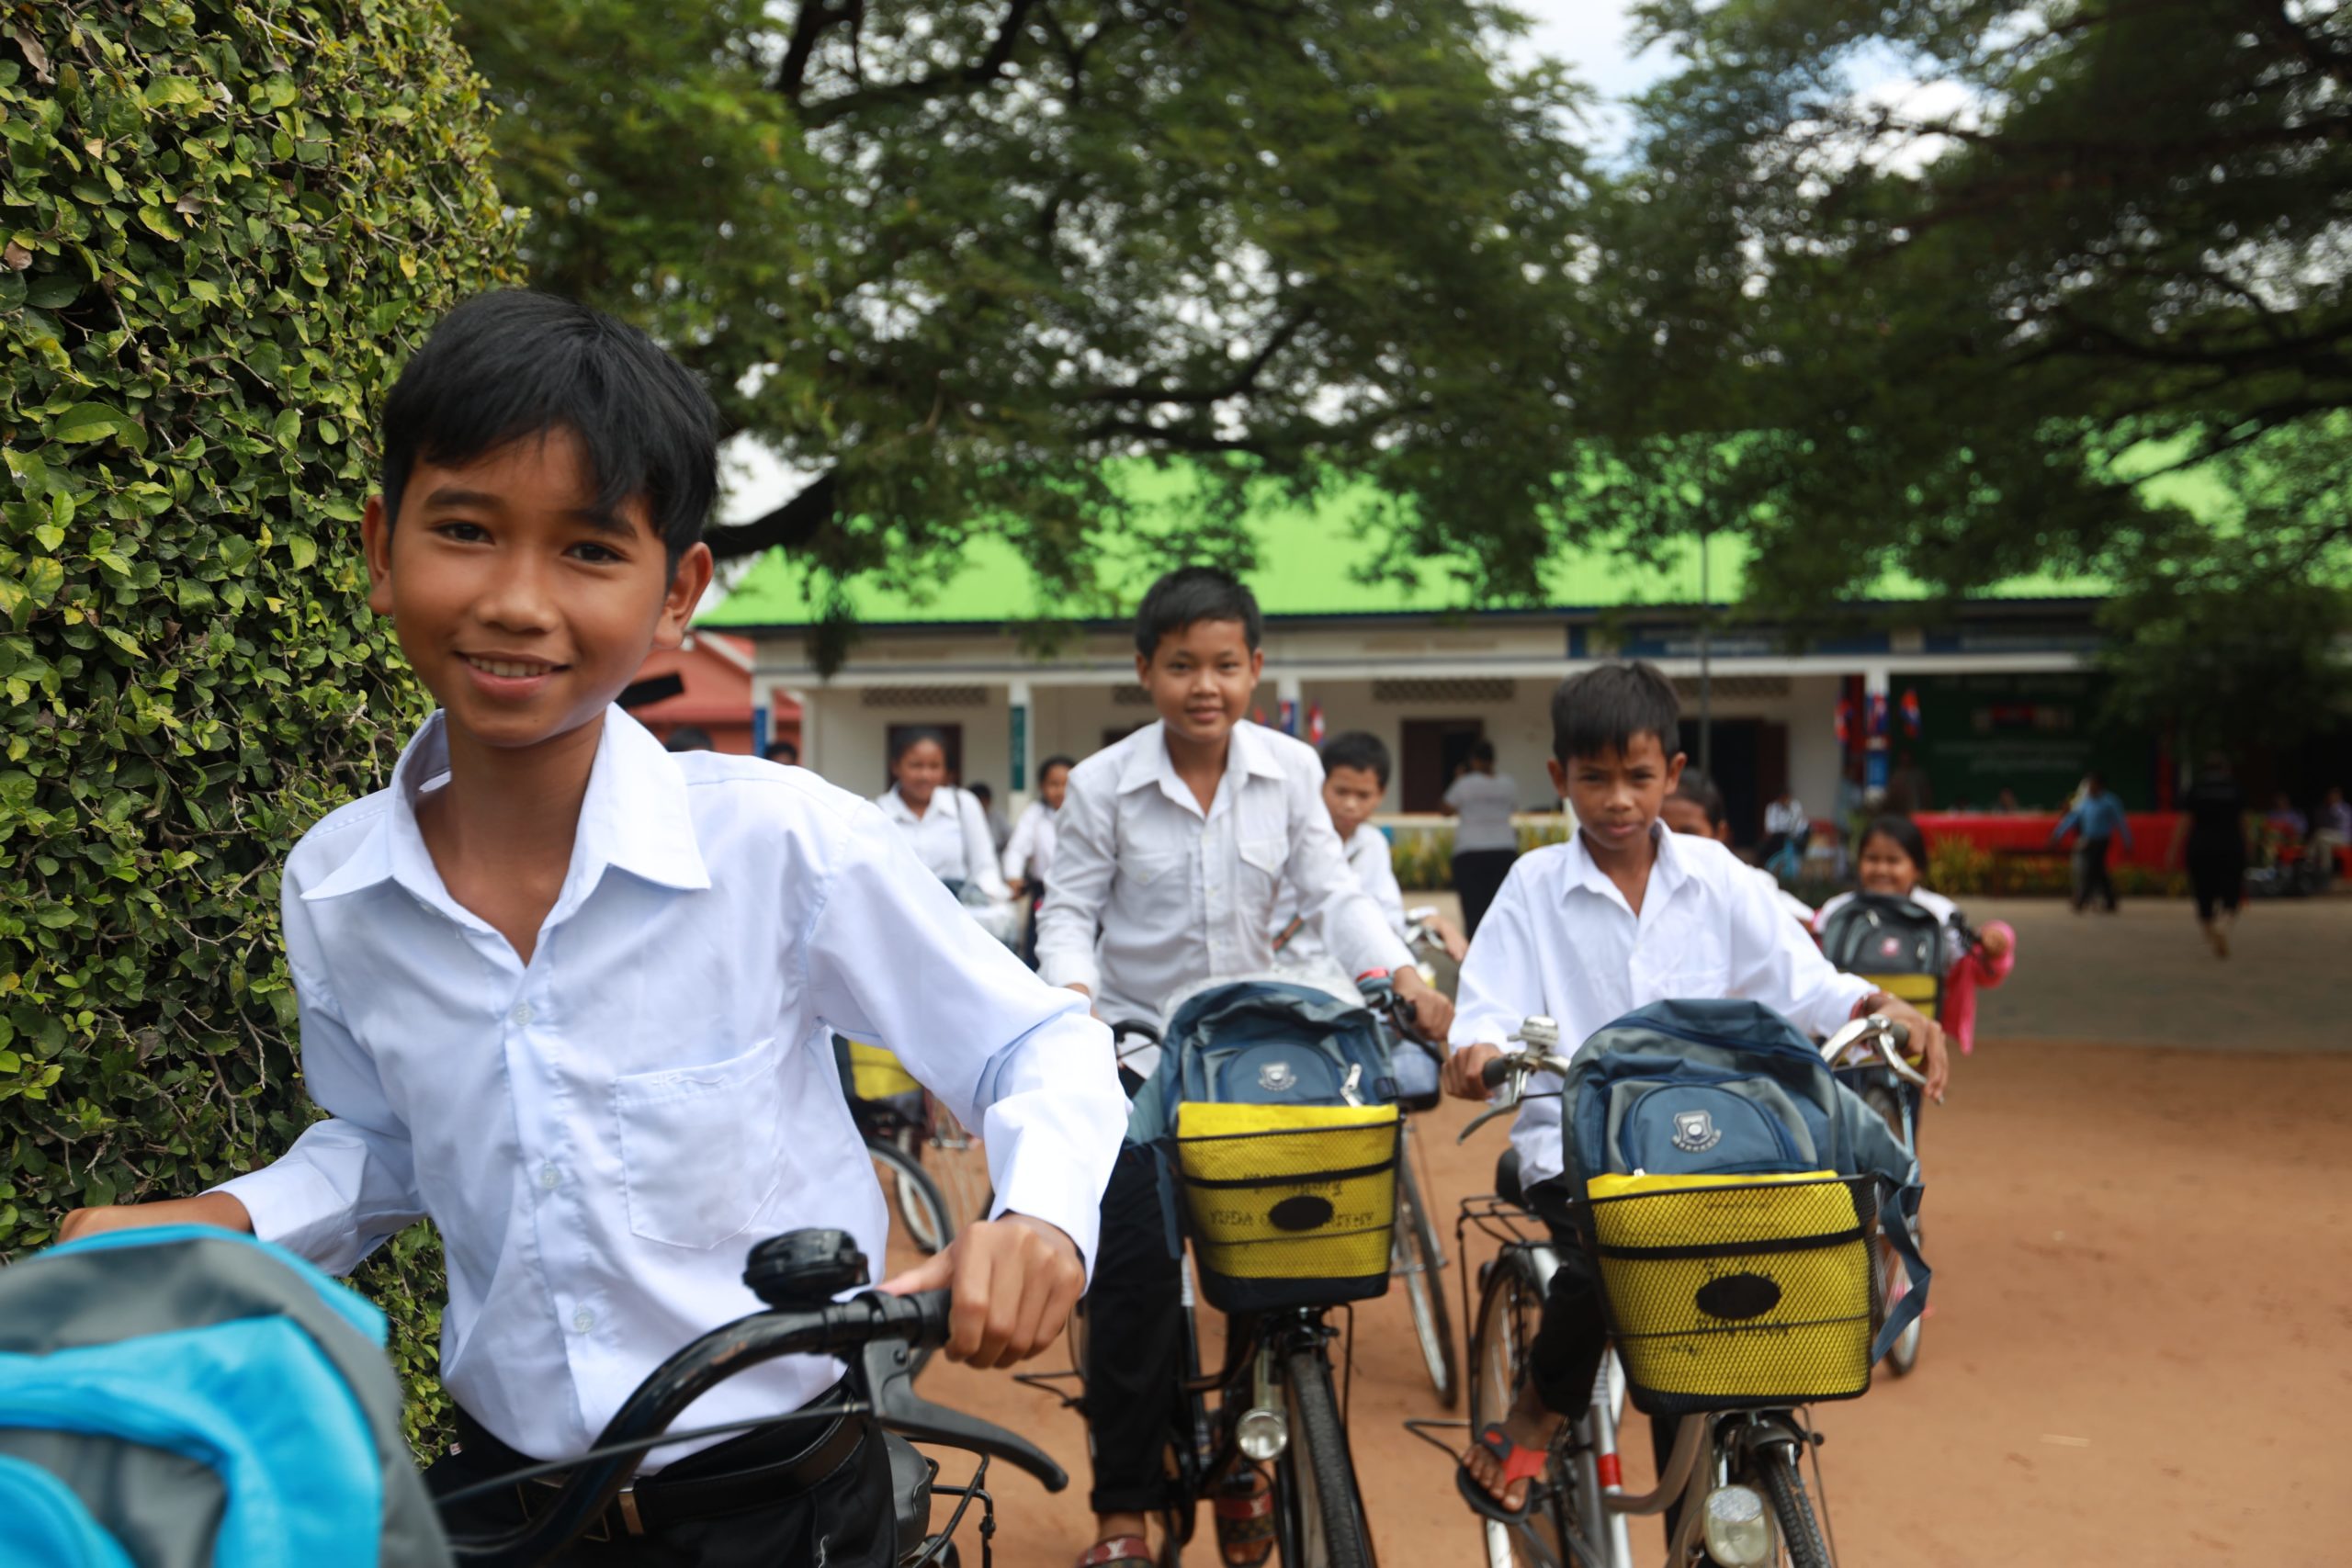 Tchey boys cycling out of school